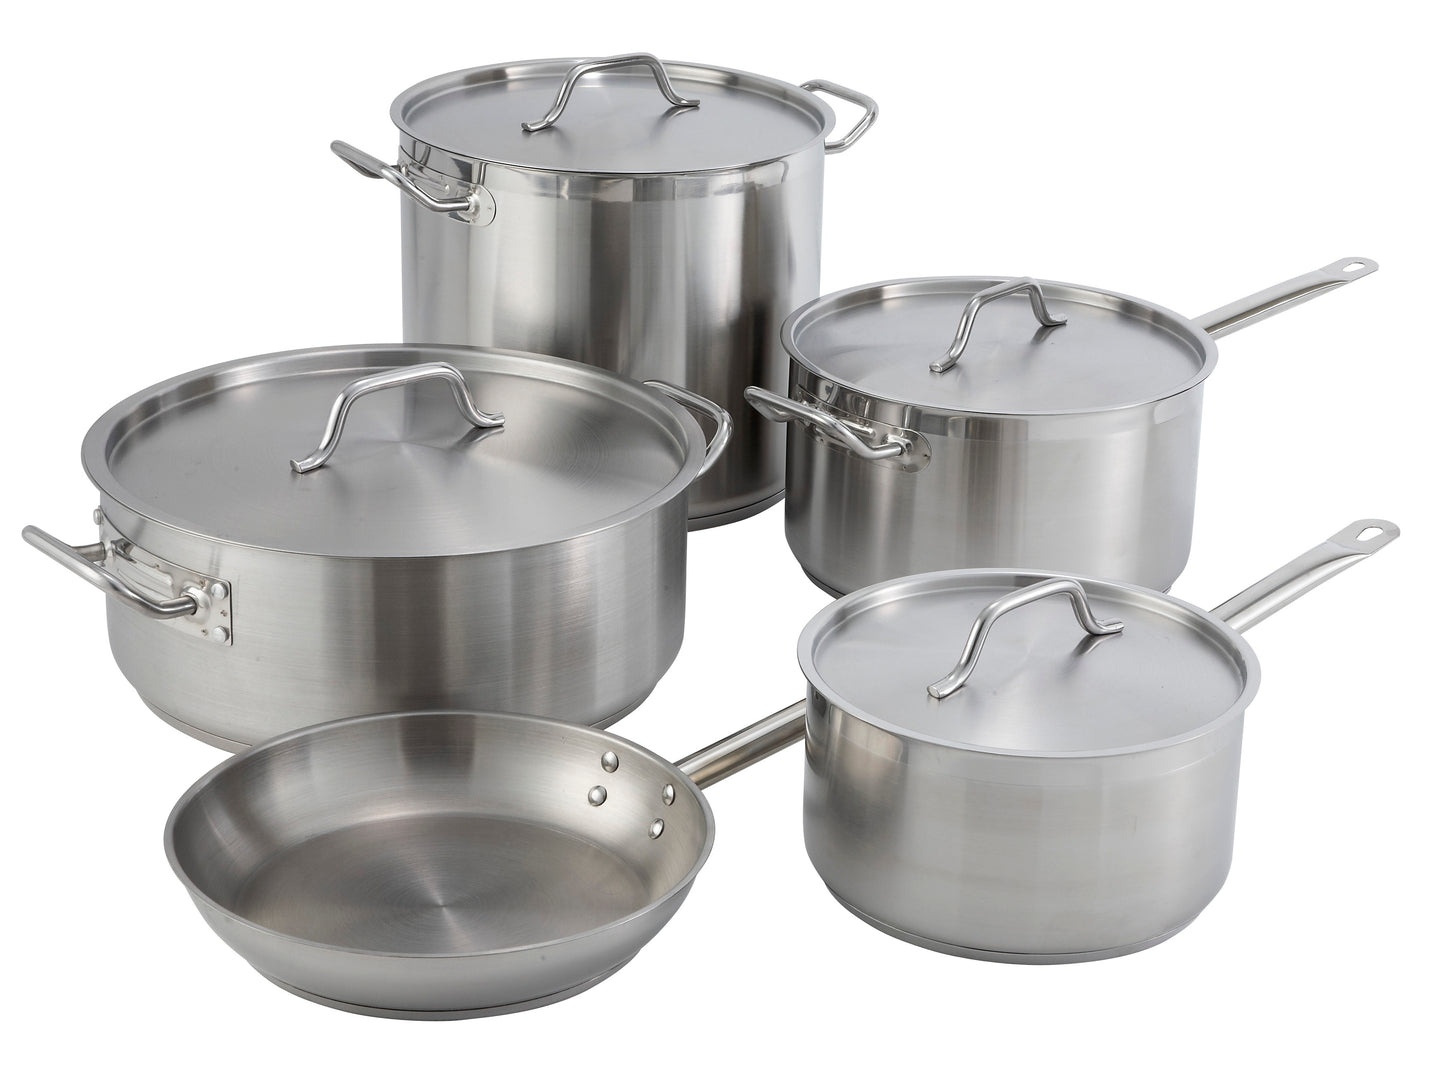 SST-12 - Stainless Steel Stock Pot with Cover - 12 Quart